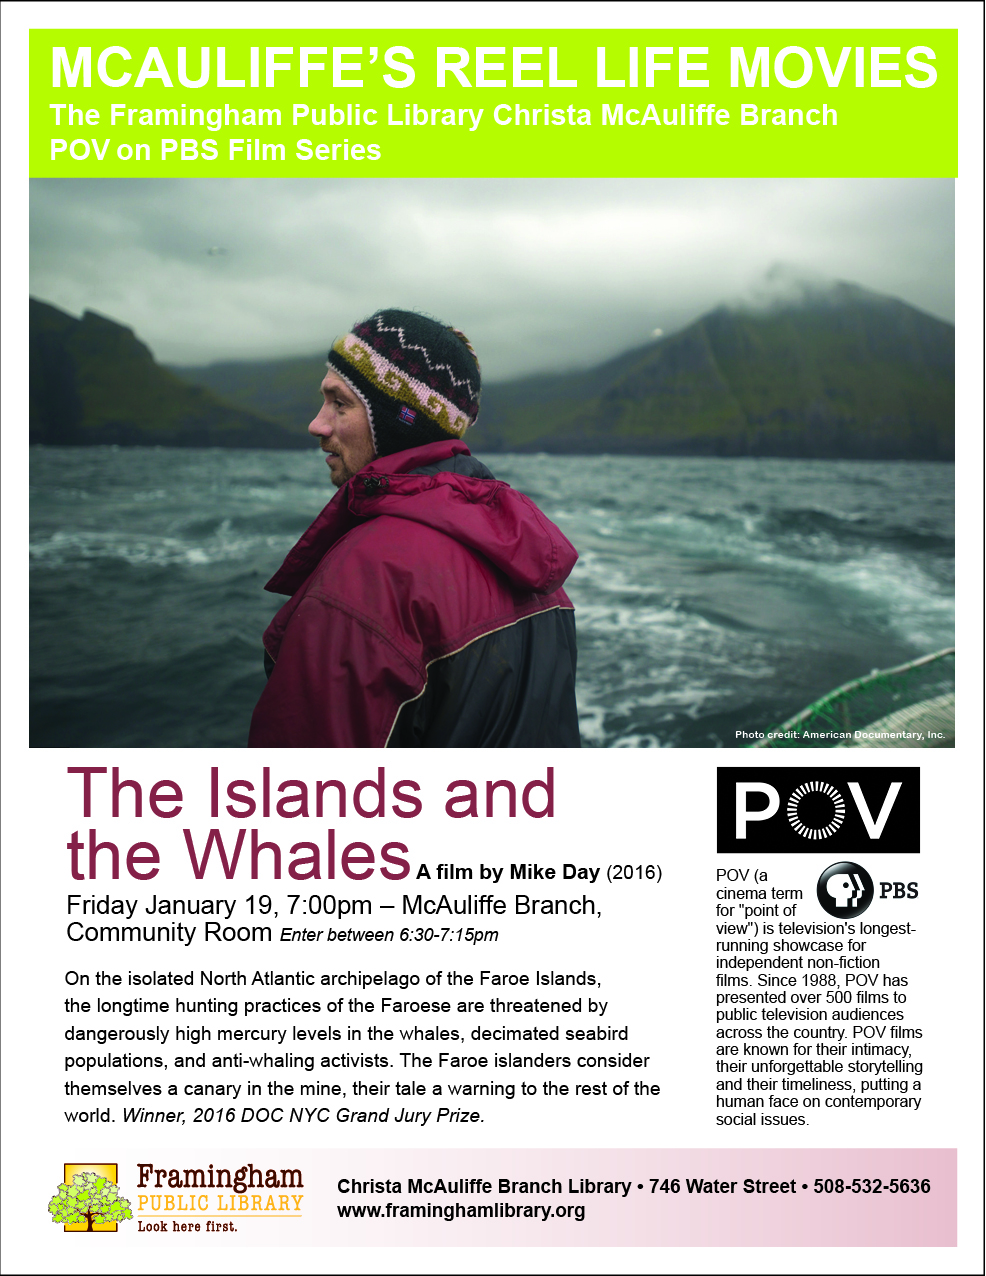 MCAULIFFE REEL LIFE MOVIES: The PBS POV Movie Series: The Islands and the Whales thumbnail Photo